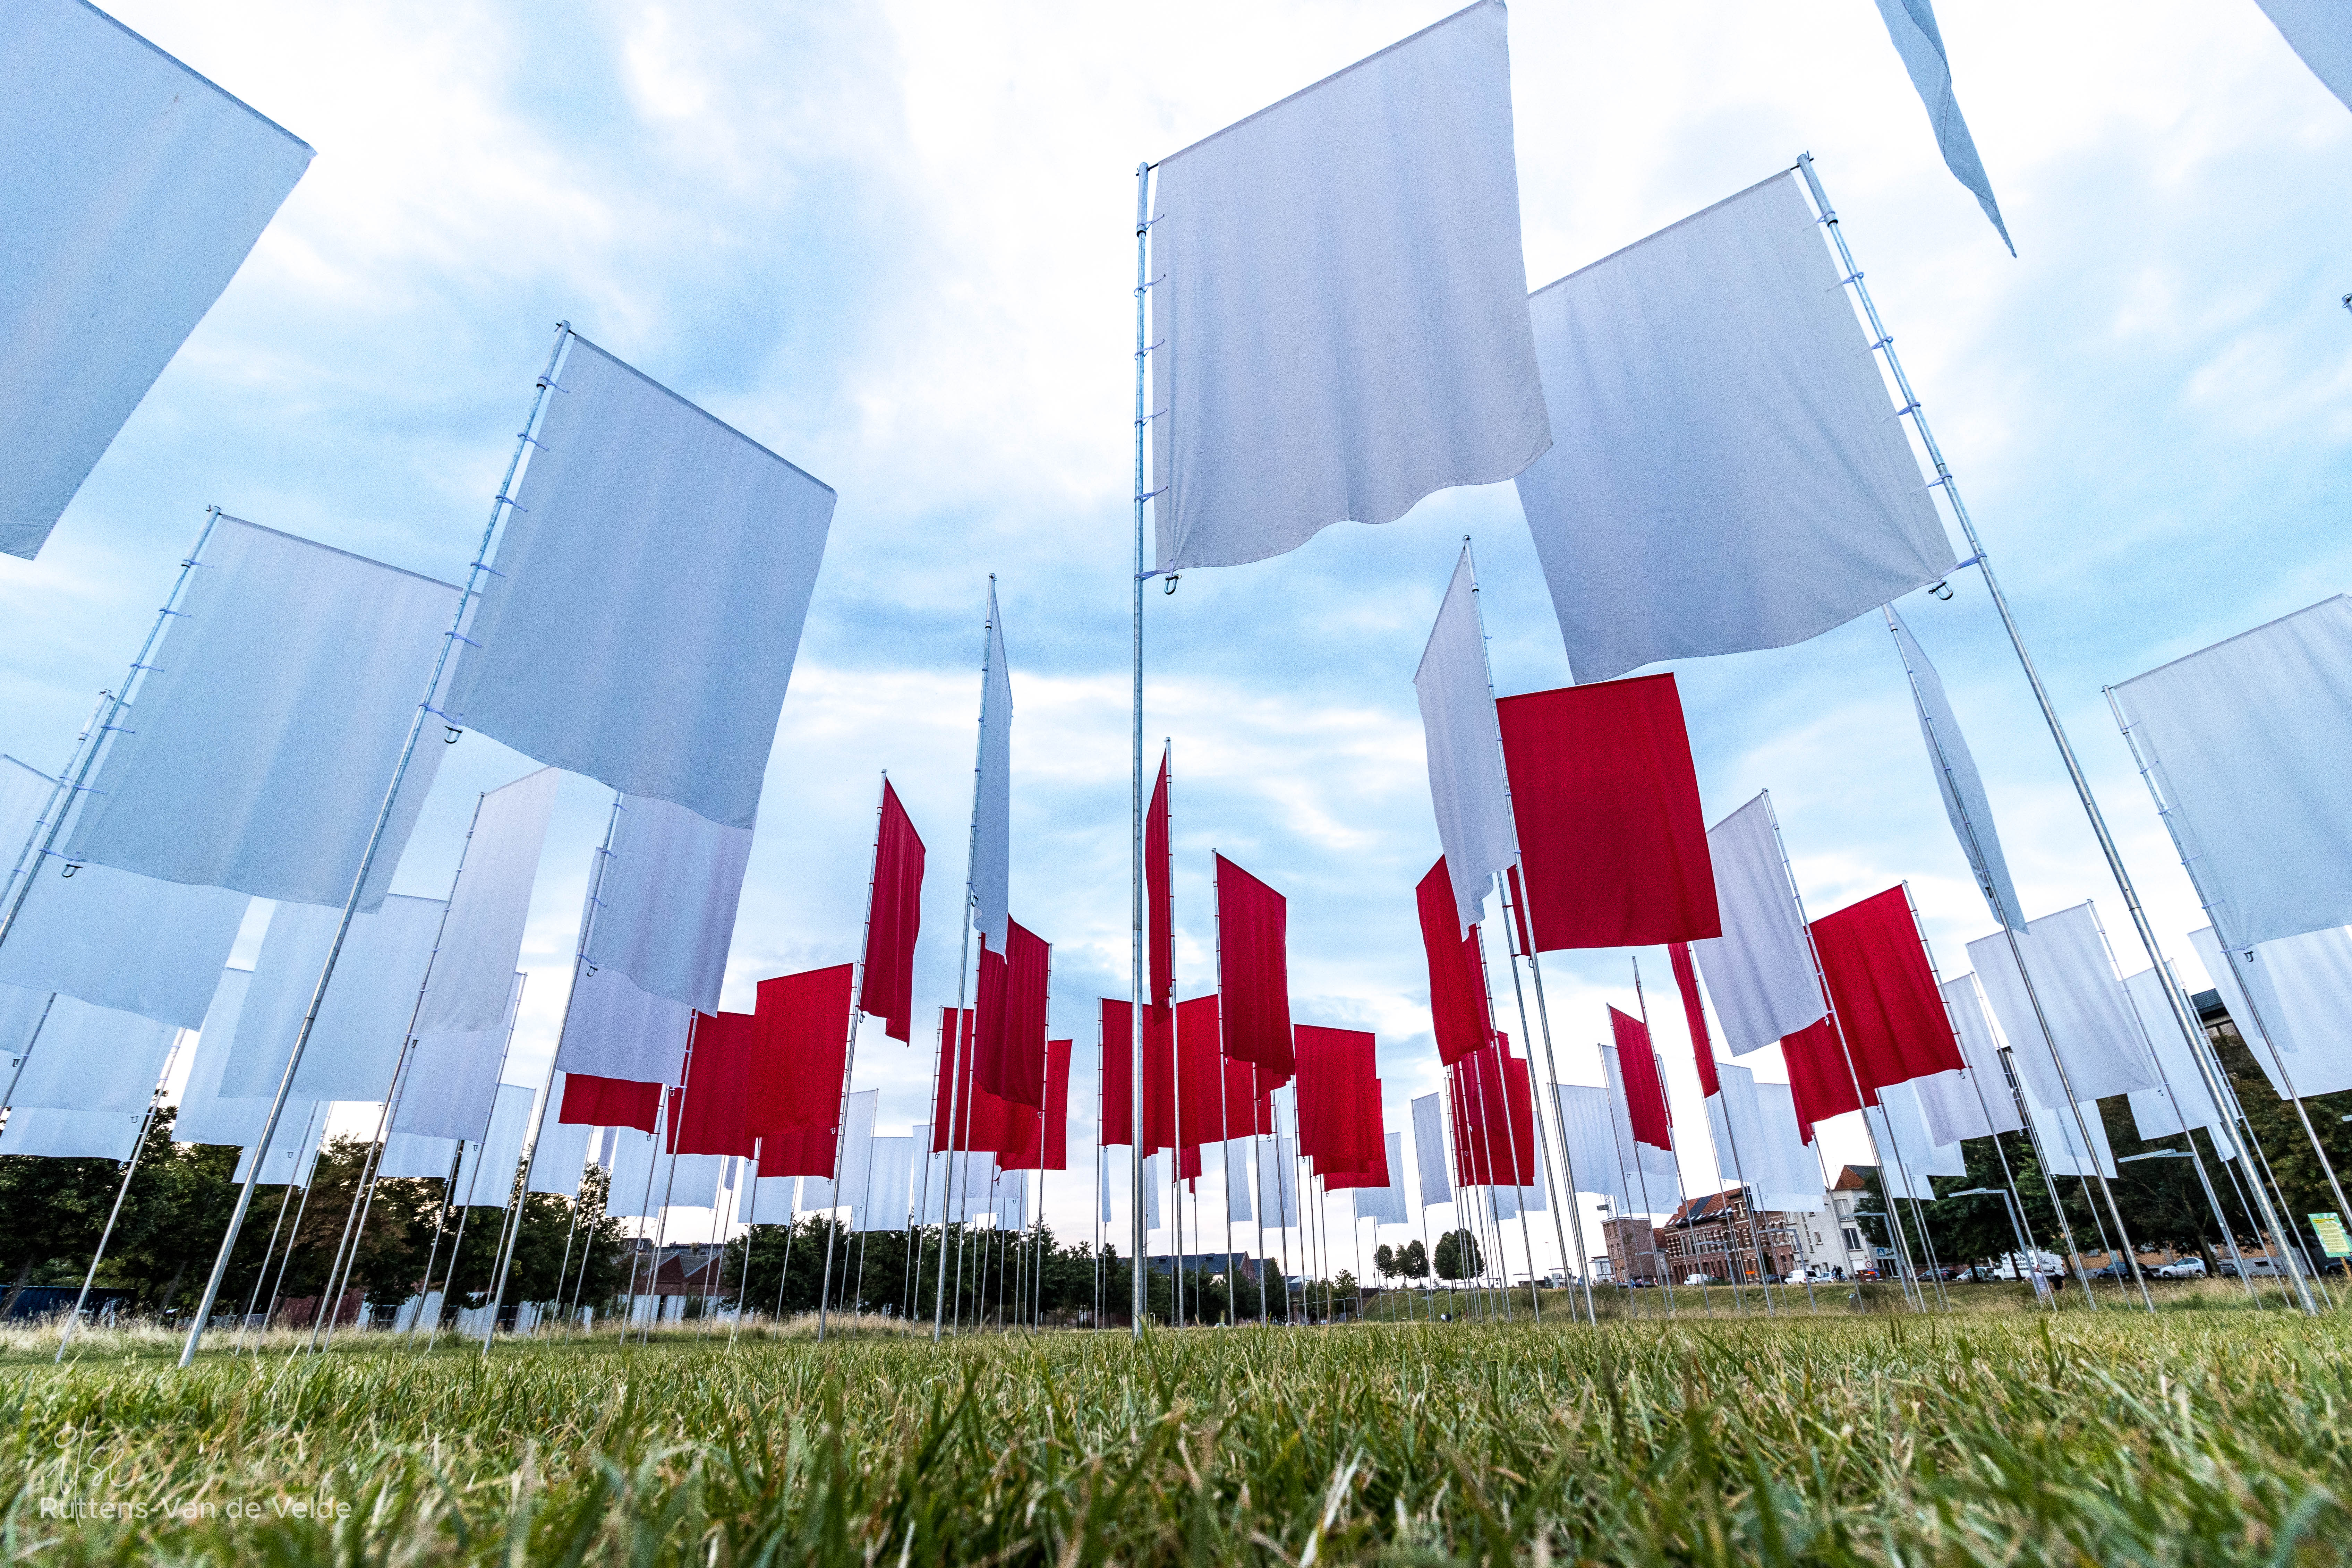 Display of red and white flags